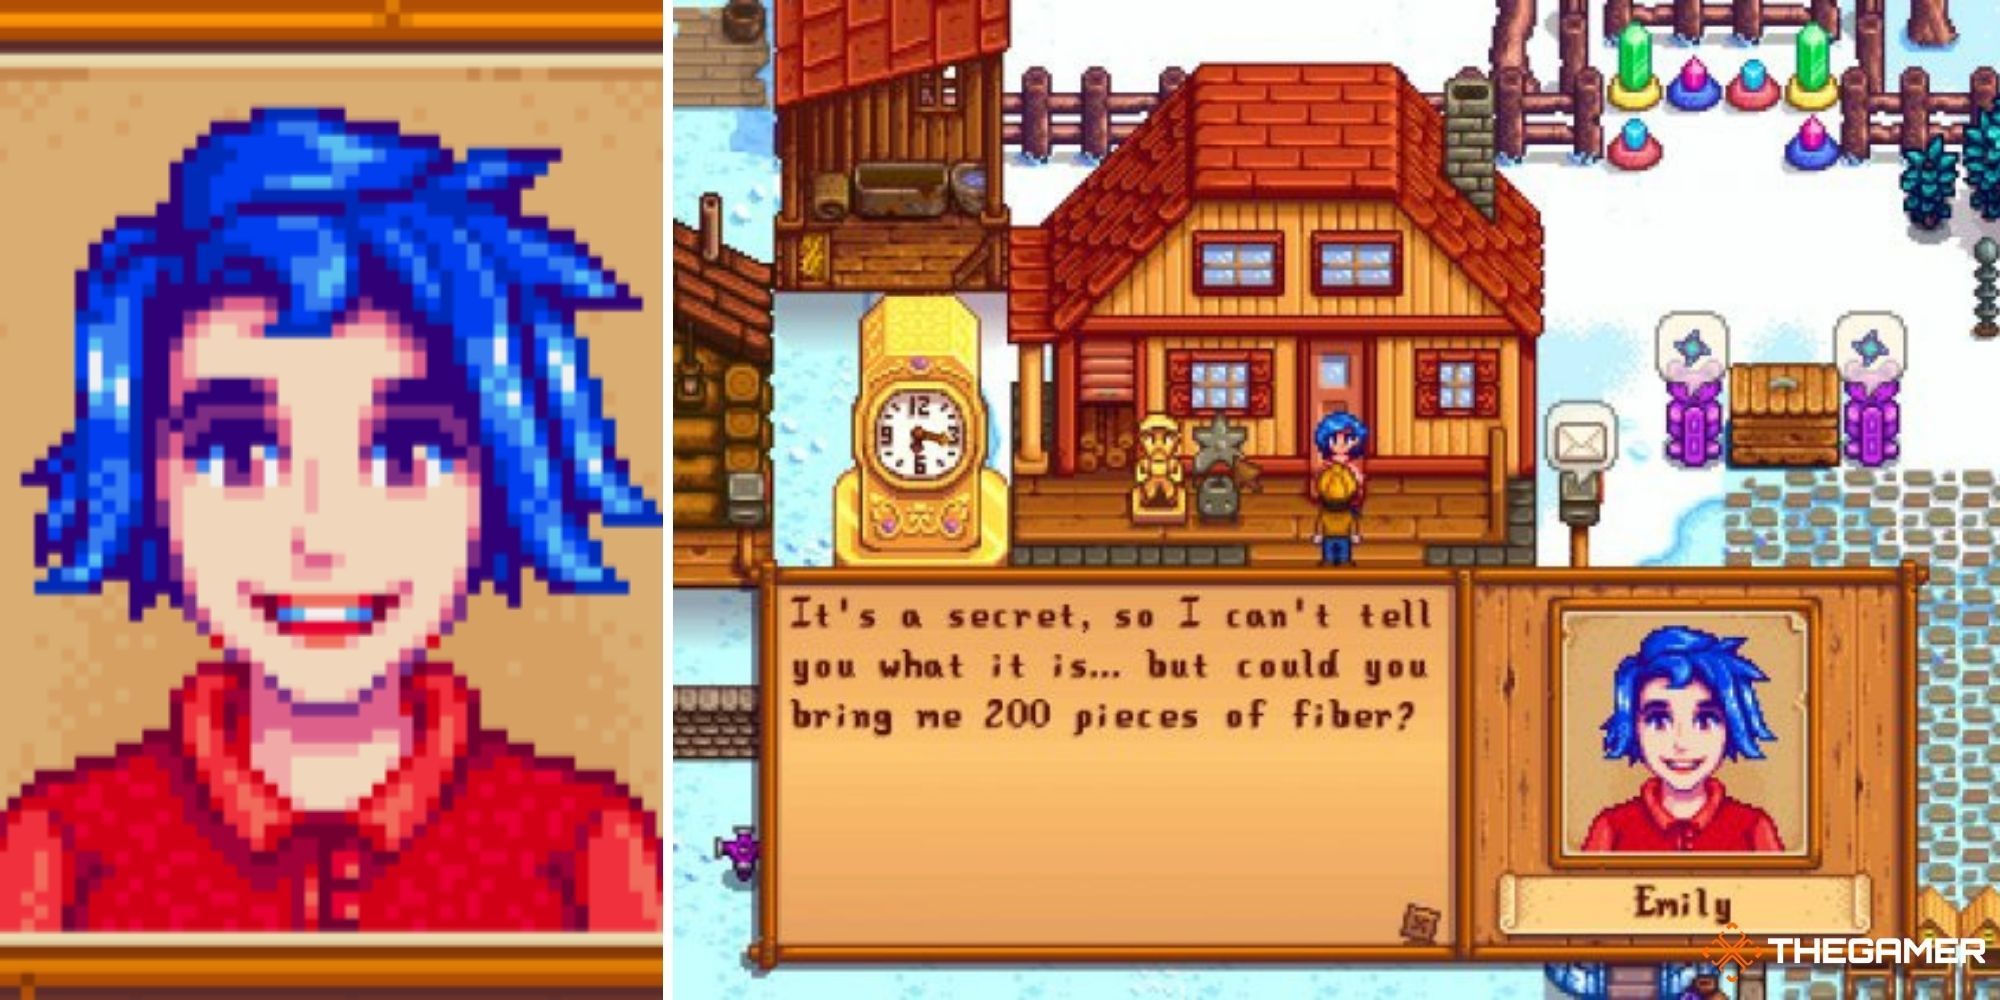 Stardew Valley Split Image - Emily (left - closeup of face) (right - textbox of character talking)